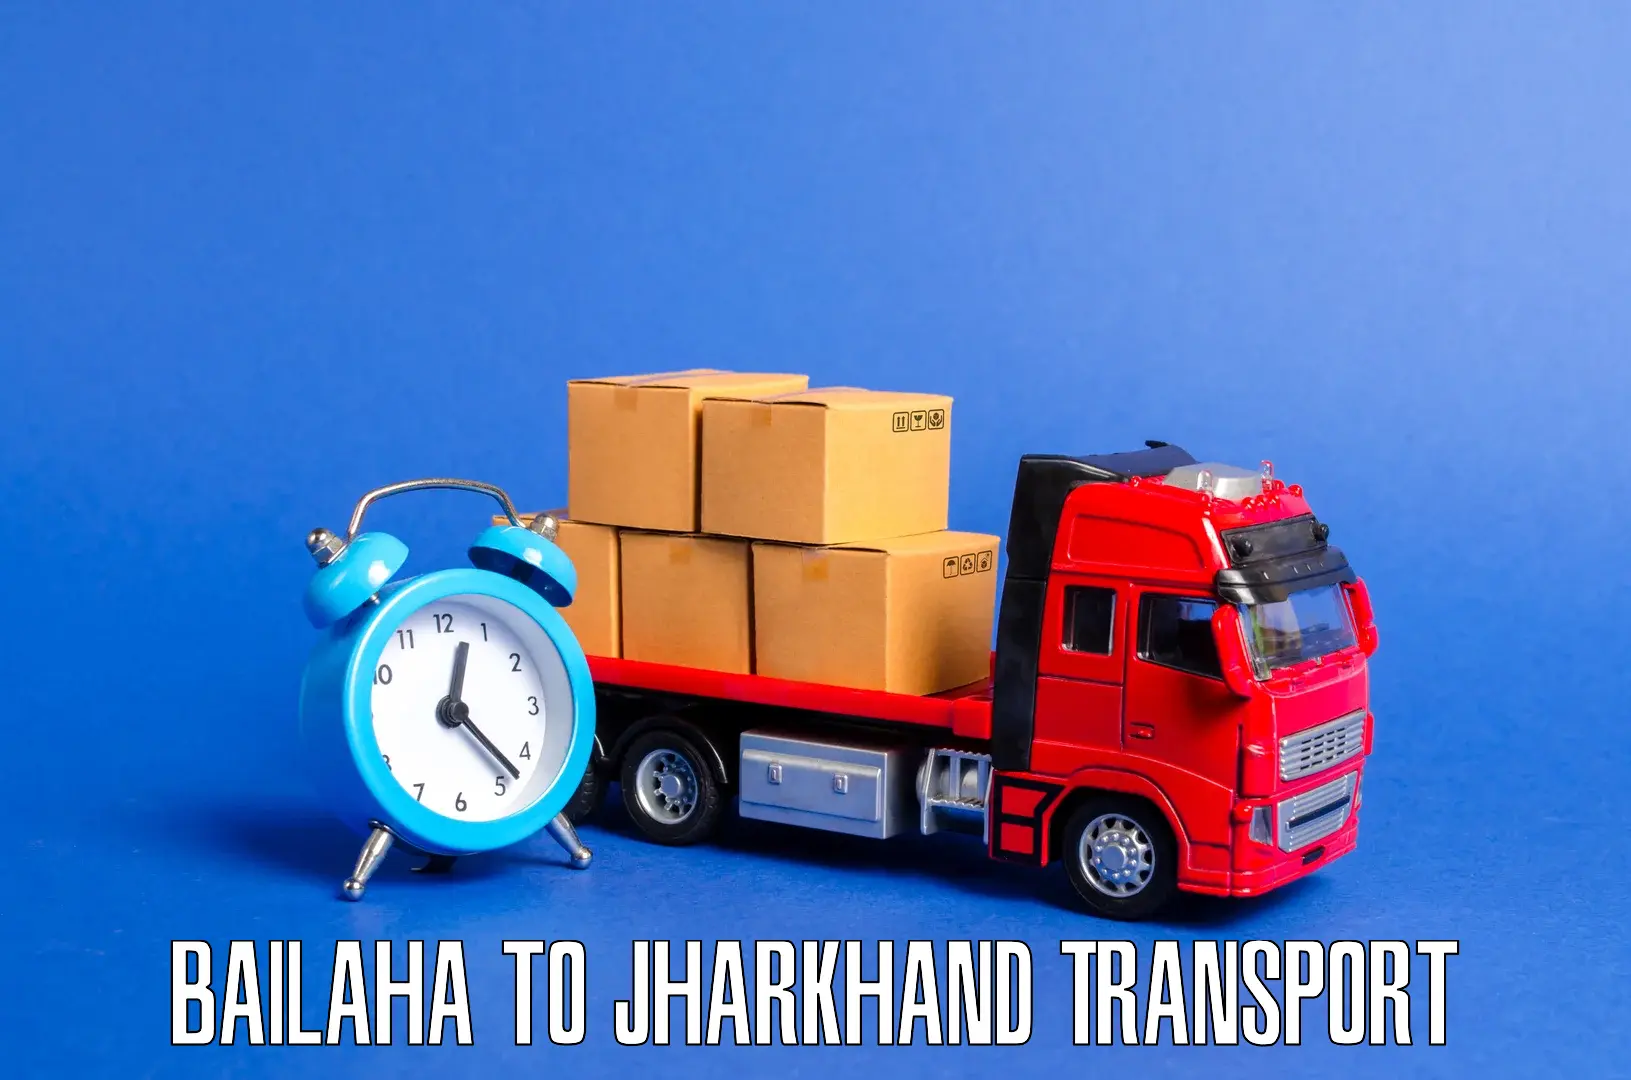 Truck transport companies in India Bailaha to Jharkhand